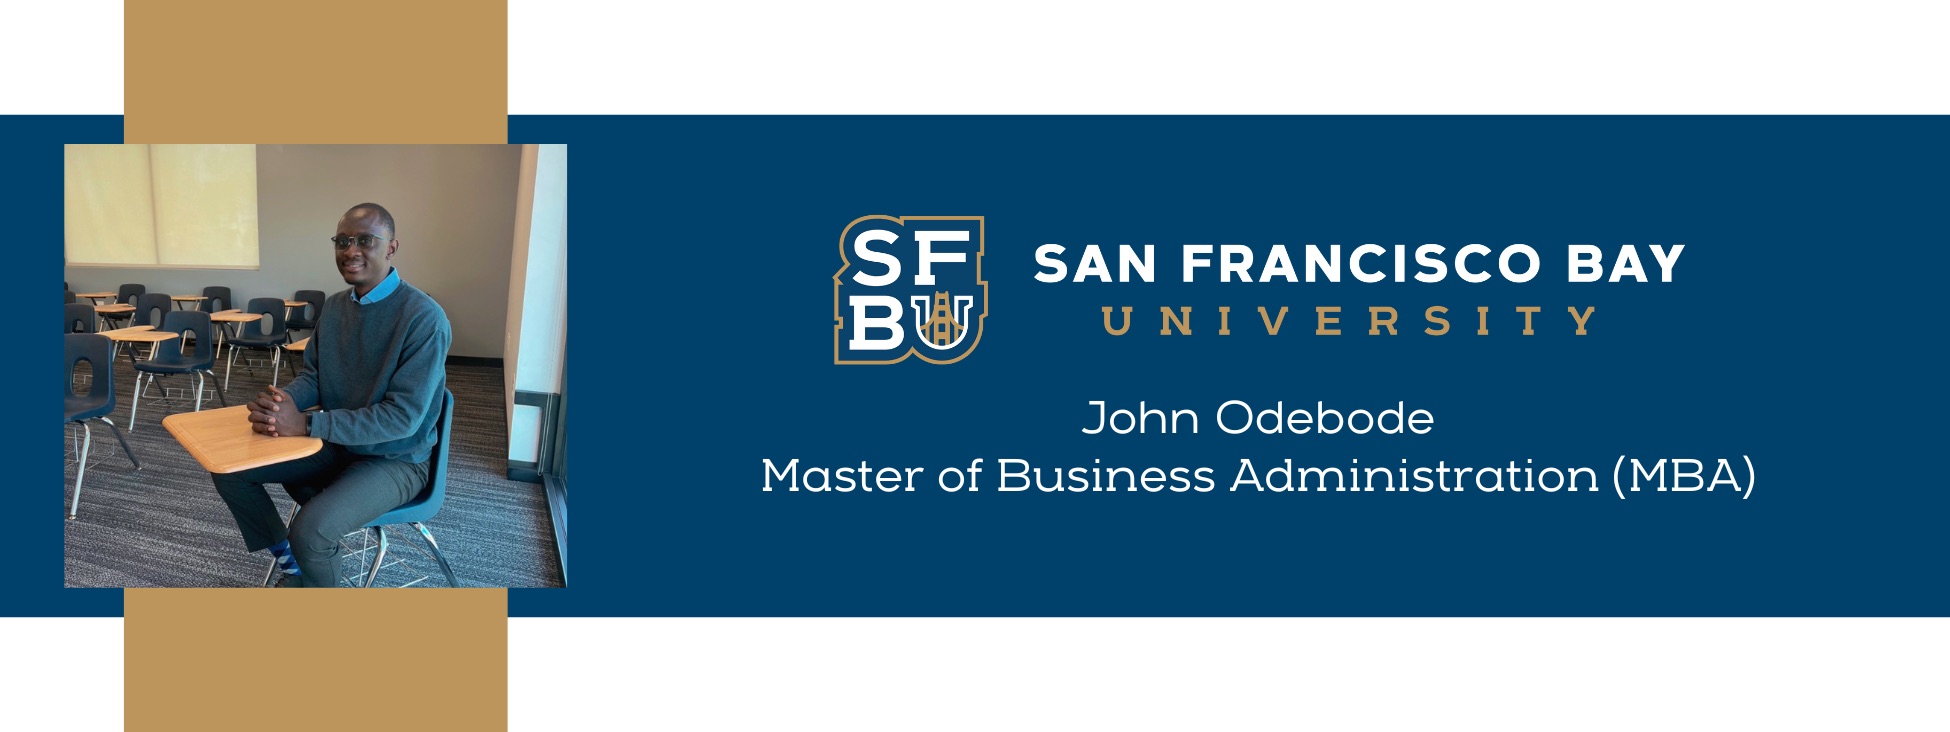 John Odebode Profile Picture with Master of Business Administration program degree at San Francisco Bay University